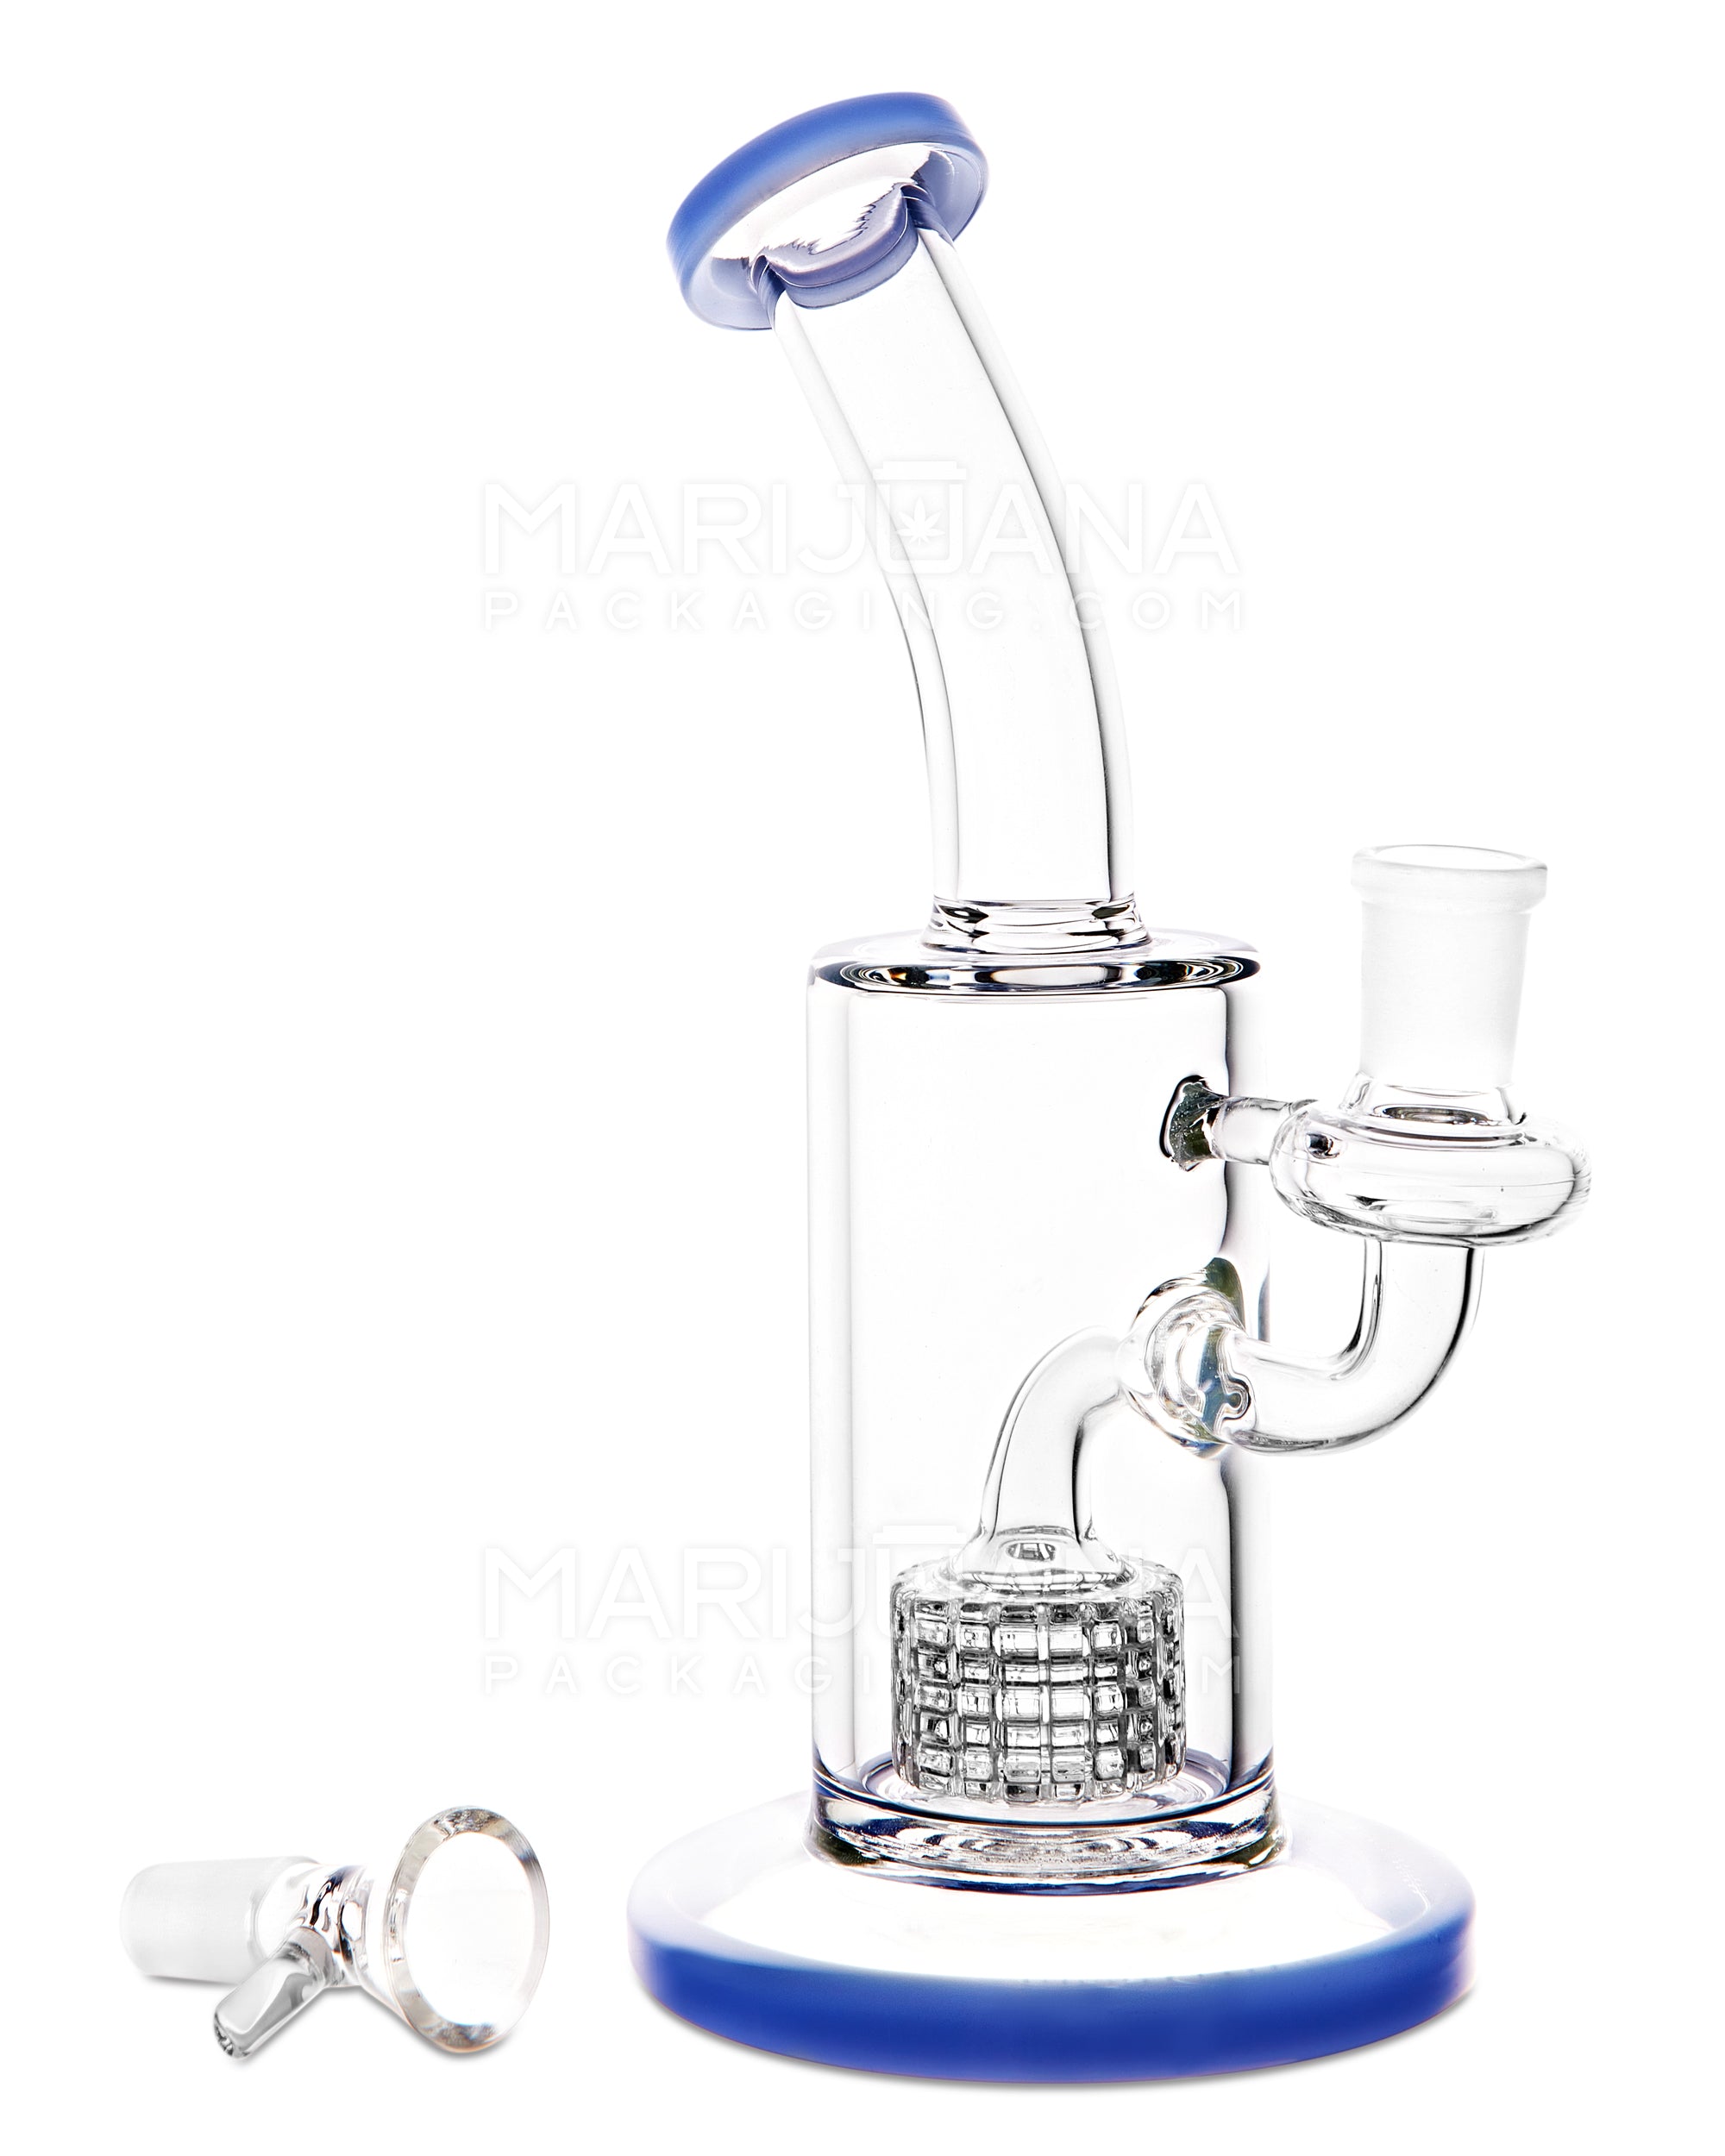 Bent Neck Matrix Perc Glass Water Pipe w/ Thick Base | 8.5in Tall - 14mm Bowl - Blue - 2